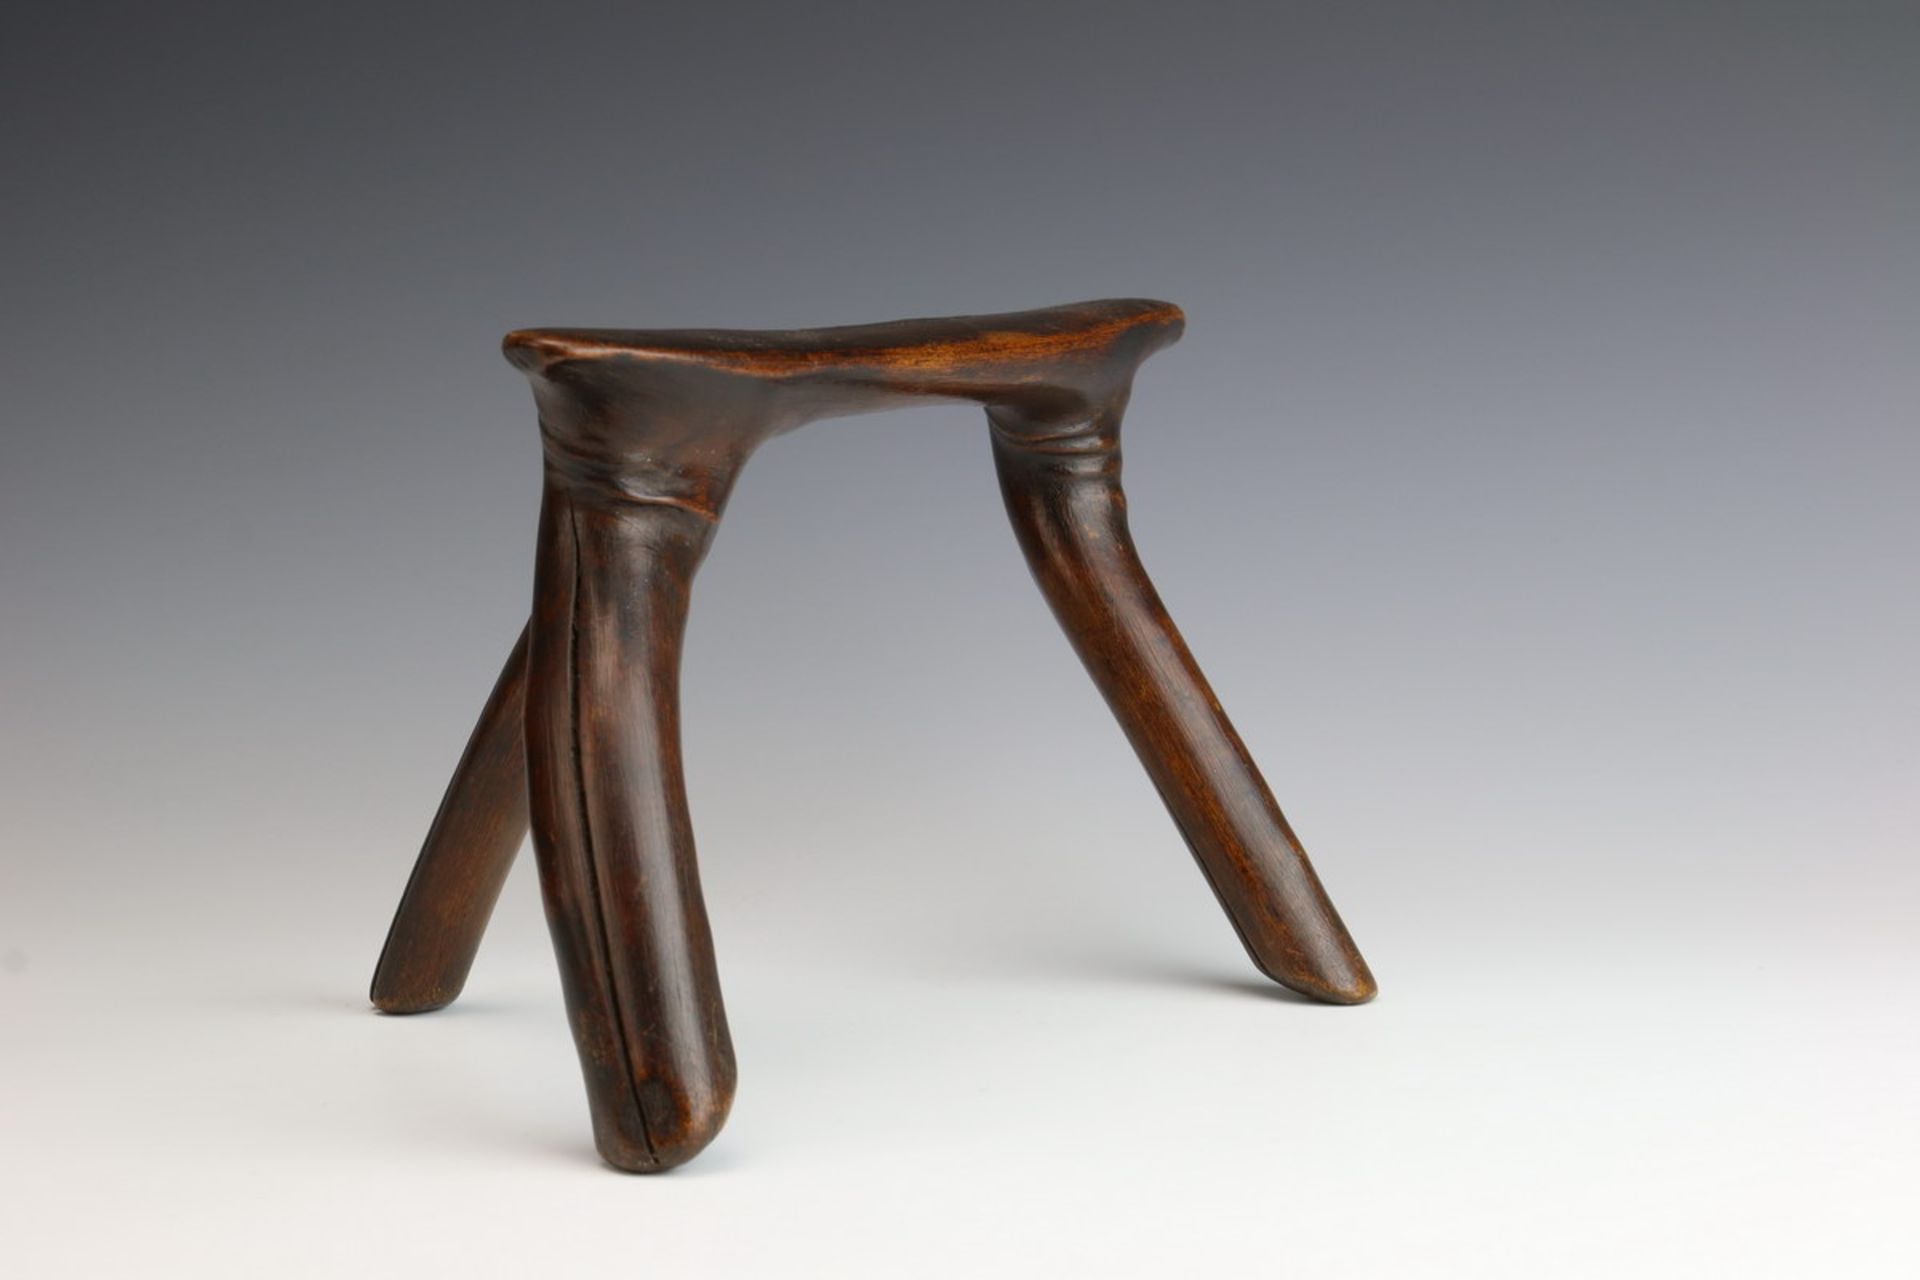 South Sudan, Dinka, wooden neckrest,with three curved legs. With glossy dark brown patina. Private - Bild 2 aus 4